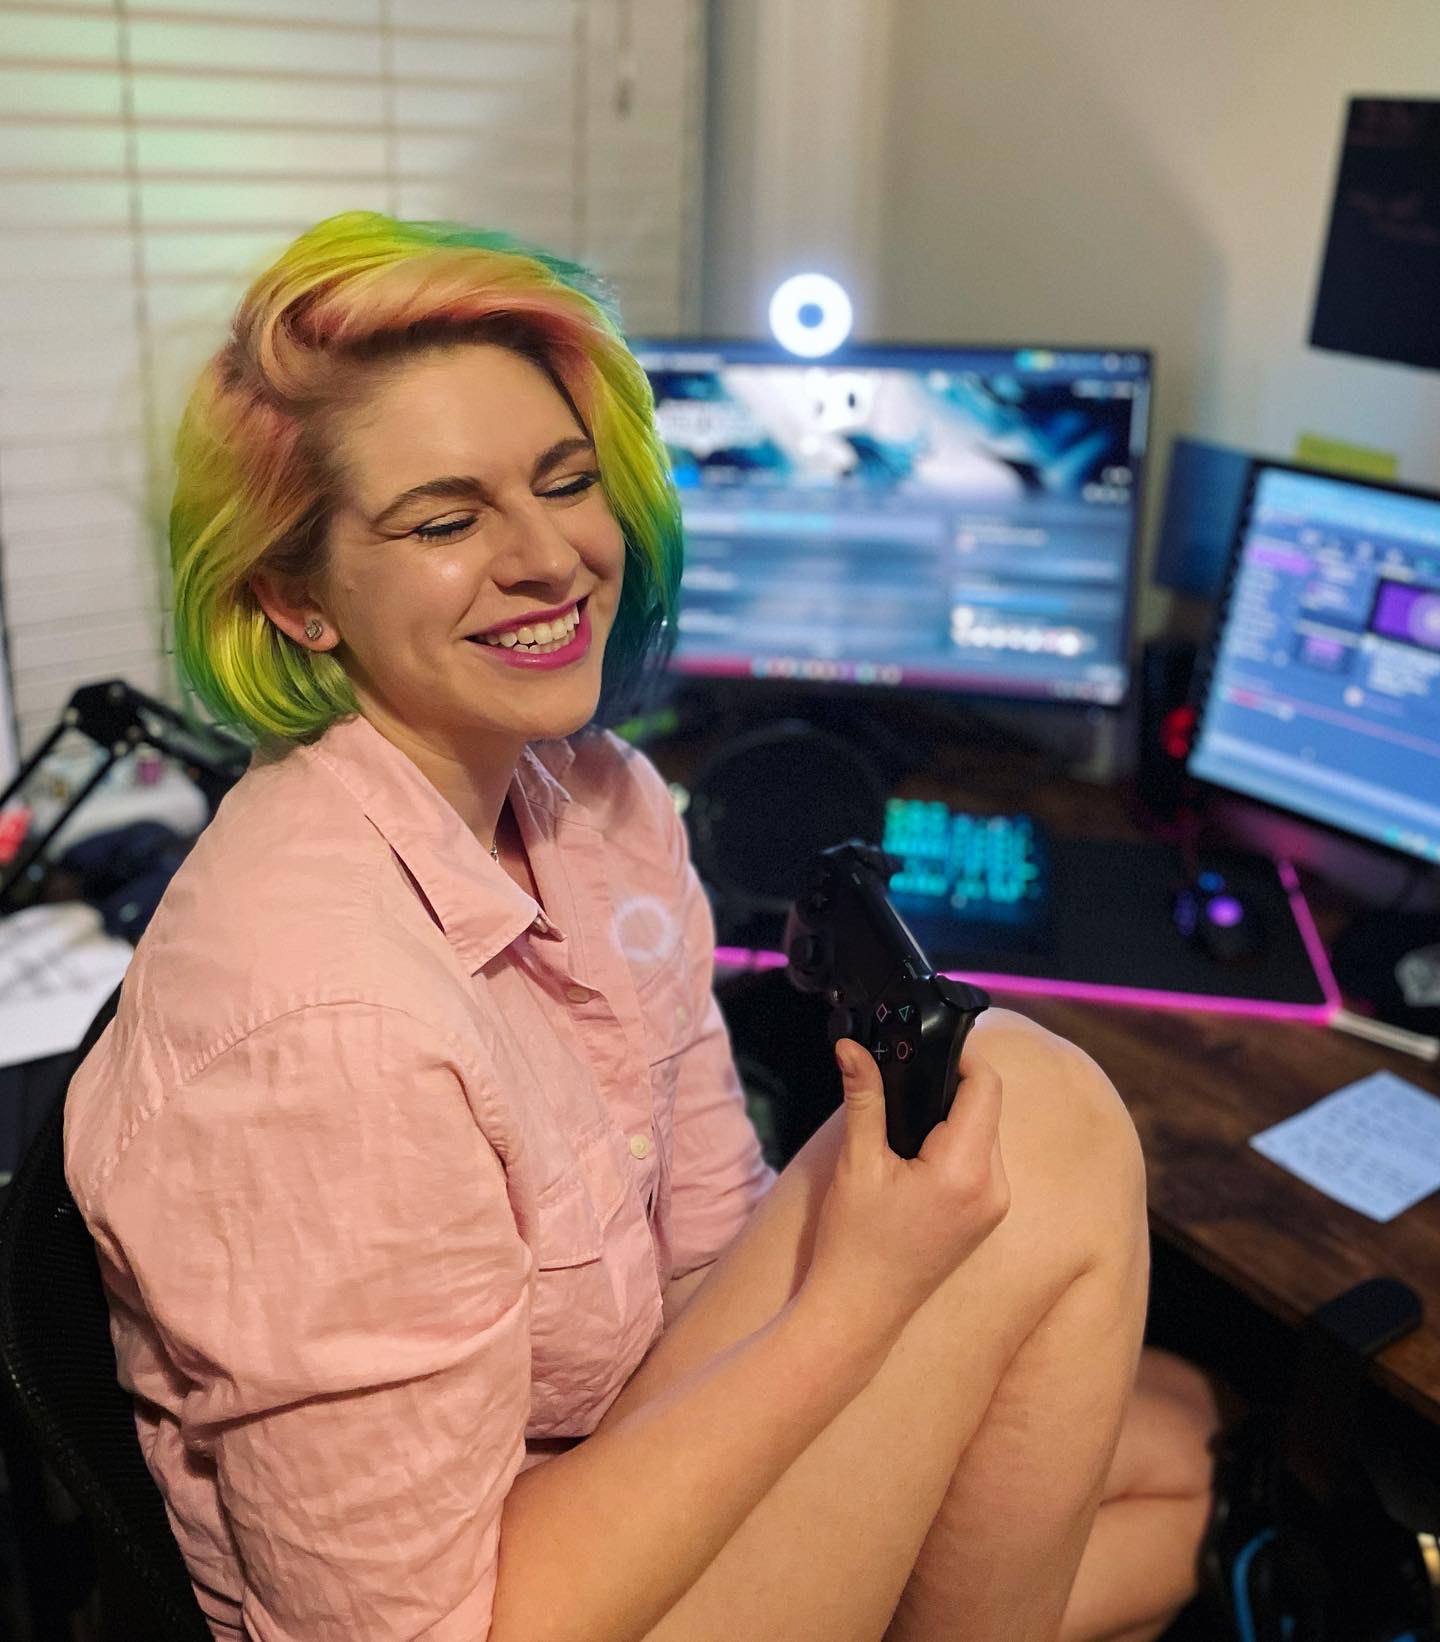 Girl with rainbow colored short hair sitting in a desk chair in front of two computer monitors, wearing a pink long sleeve shirt, holding a PlayStation controller and smiling with her eyes shut